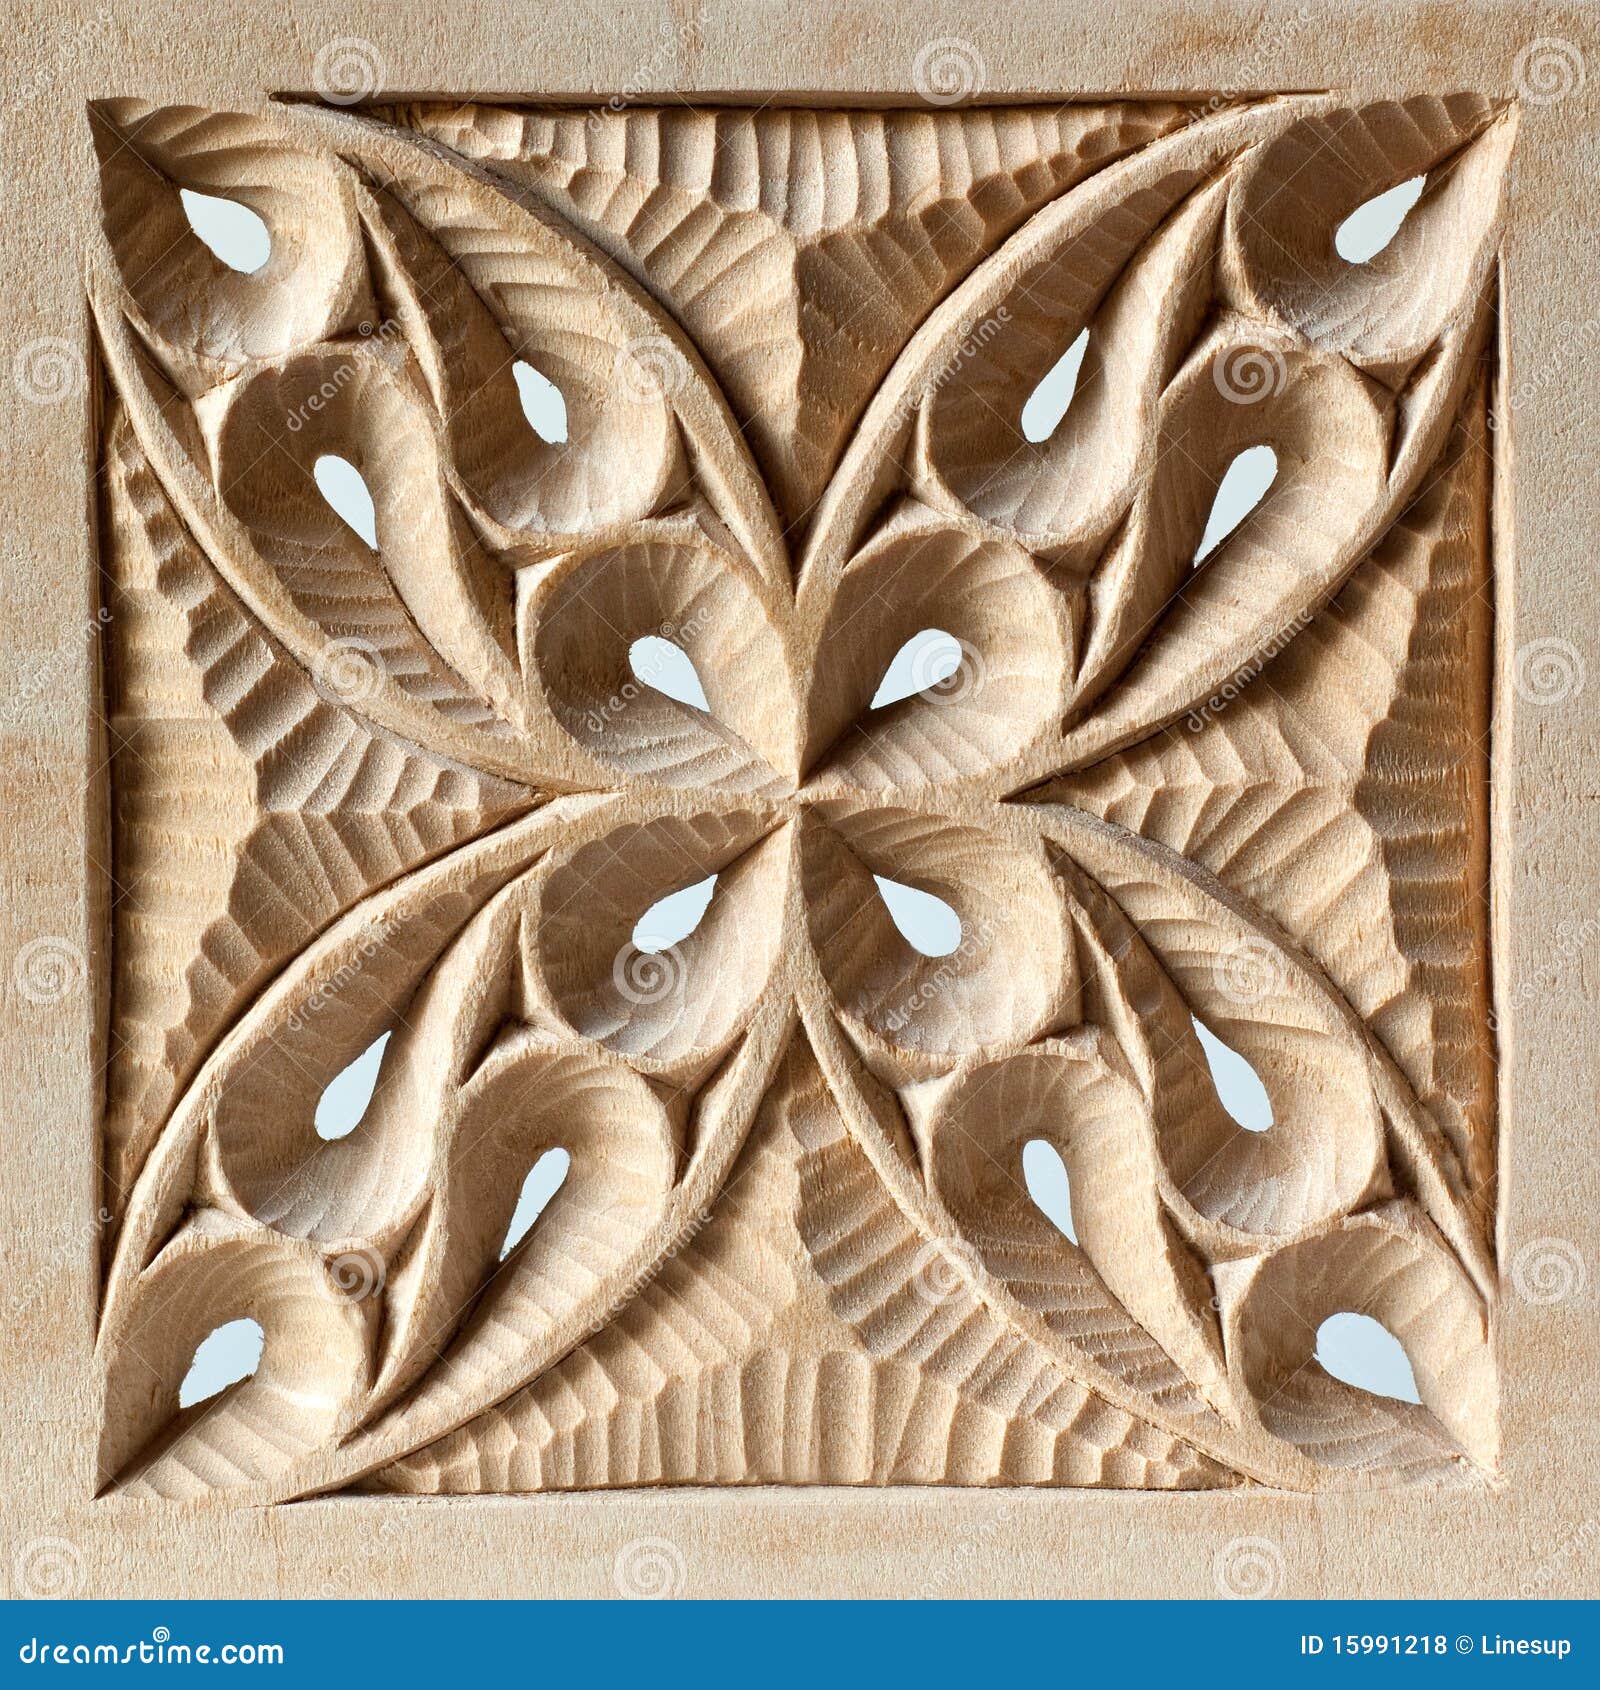 Pierced Carved Wood Panel Royalty Free Stock Photos - Image: 15991218